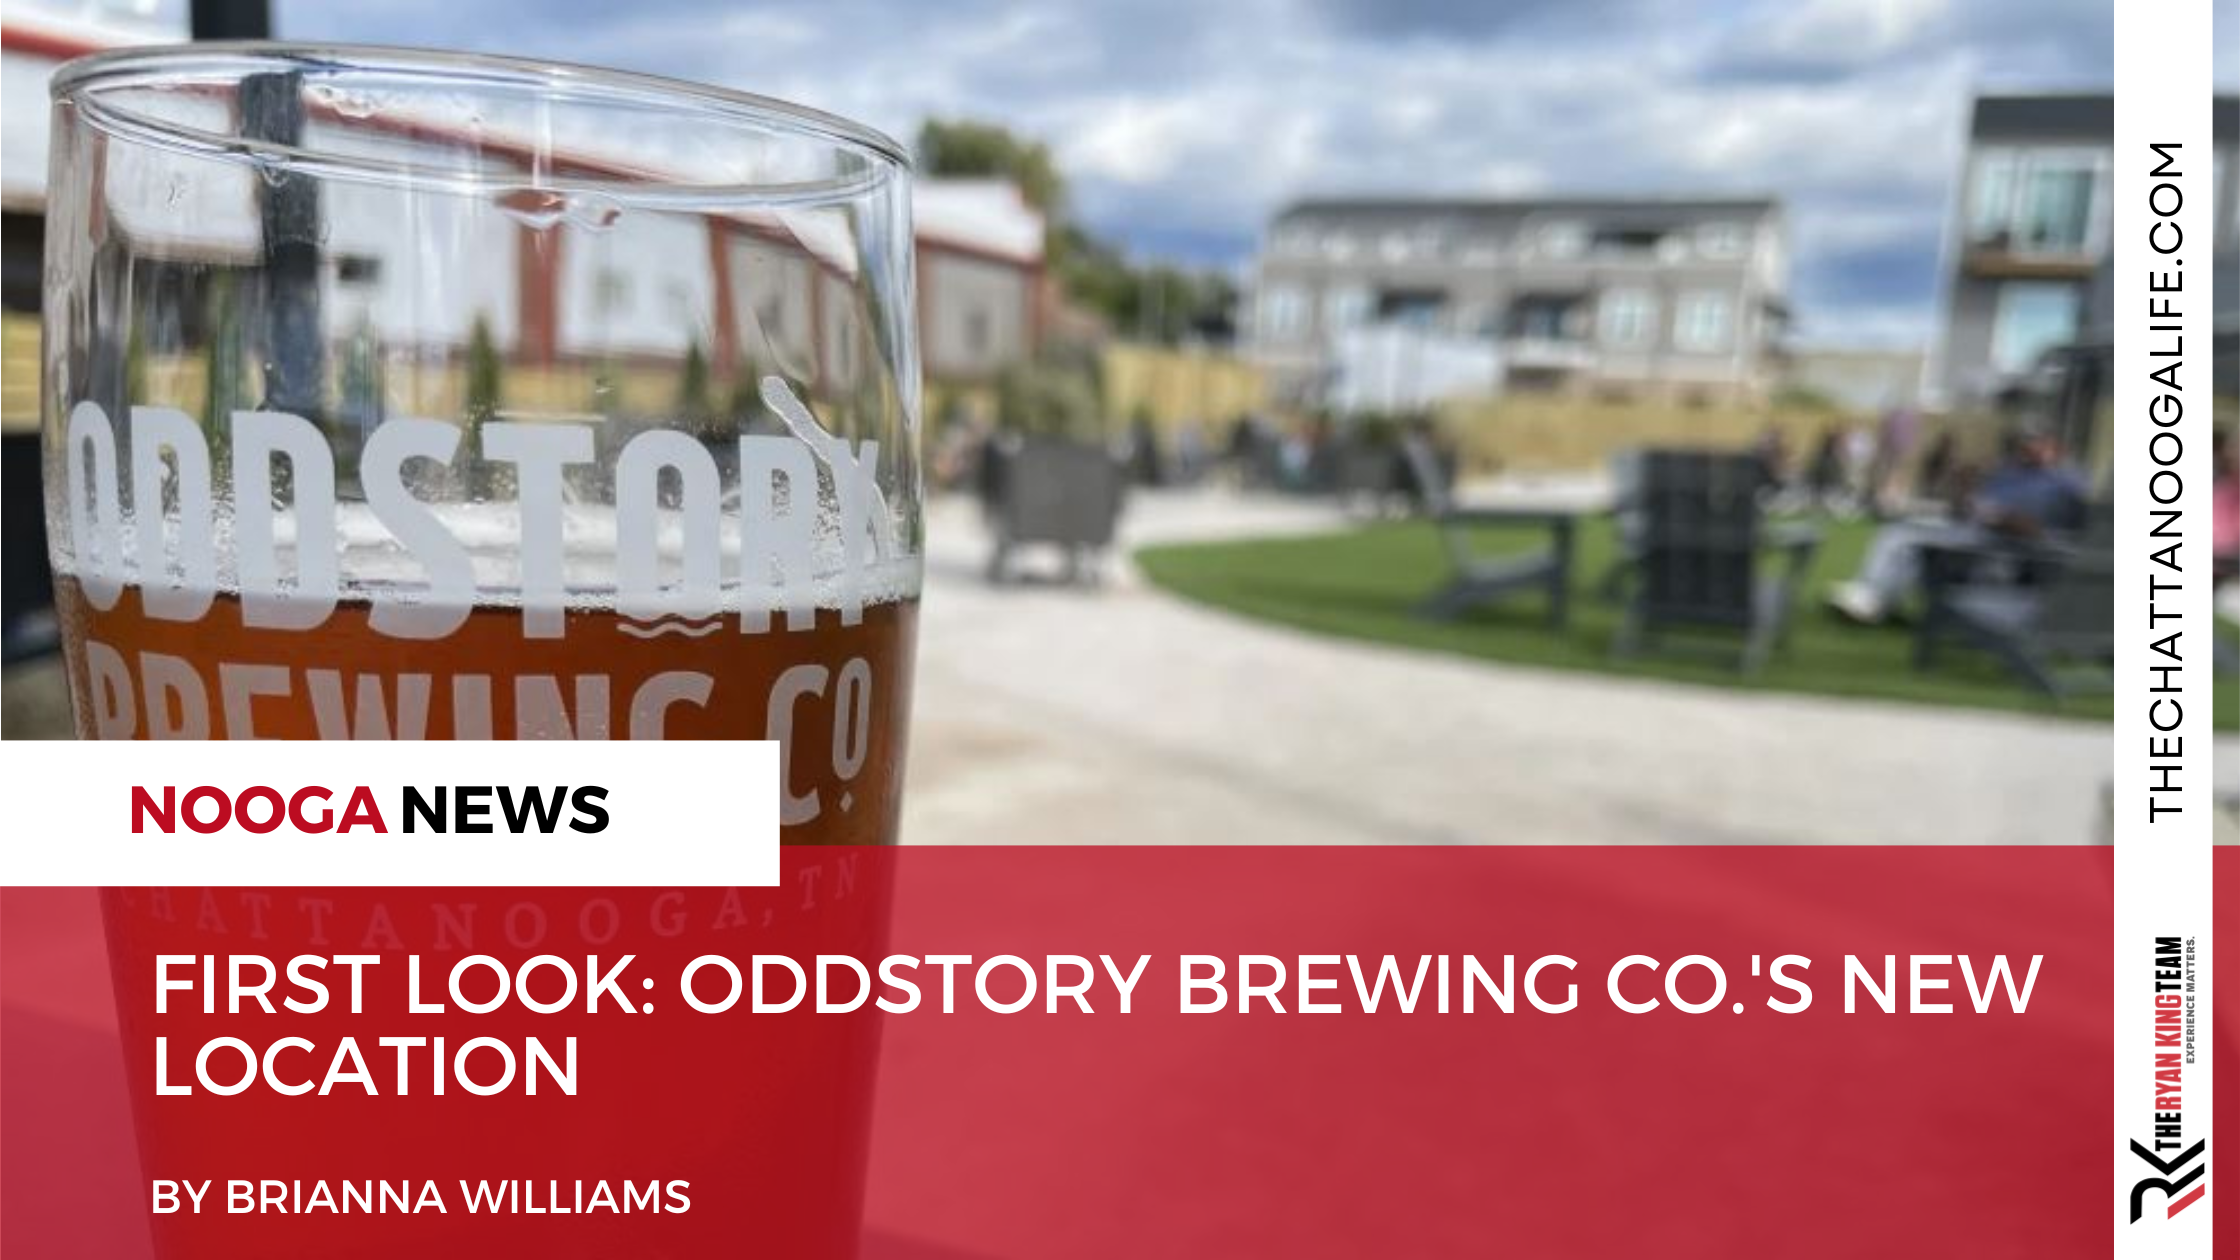 First Look: OddStory Brewing Co.'s new location